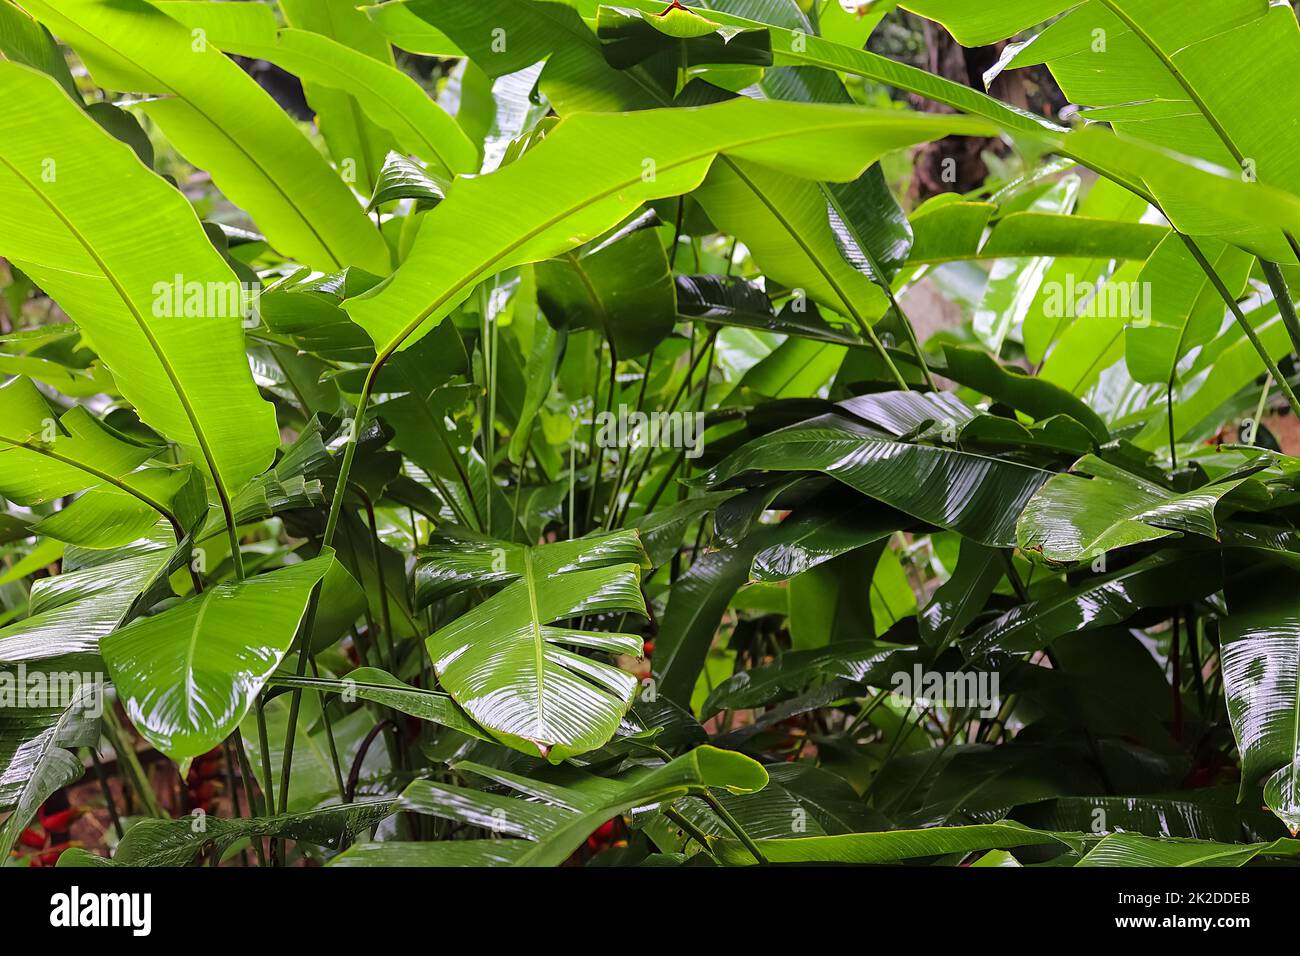 Beautiful green close up shots of tropical plant leaves taken on the Seychelles islands Stock Photo